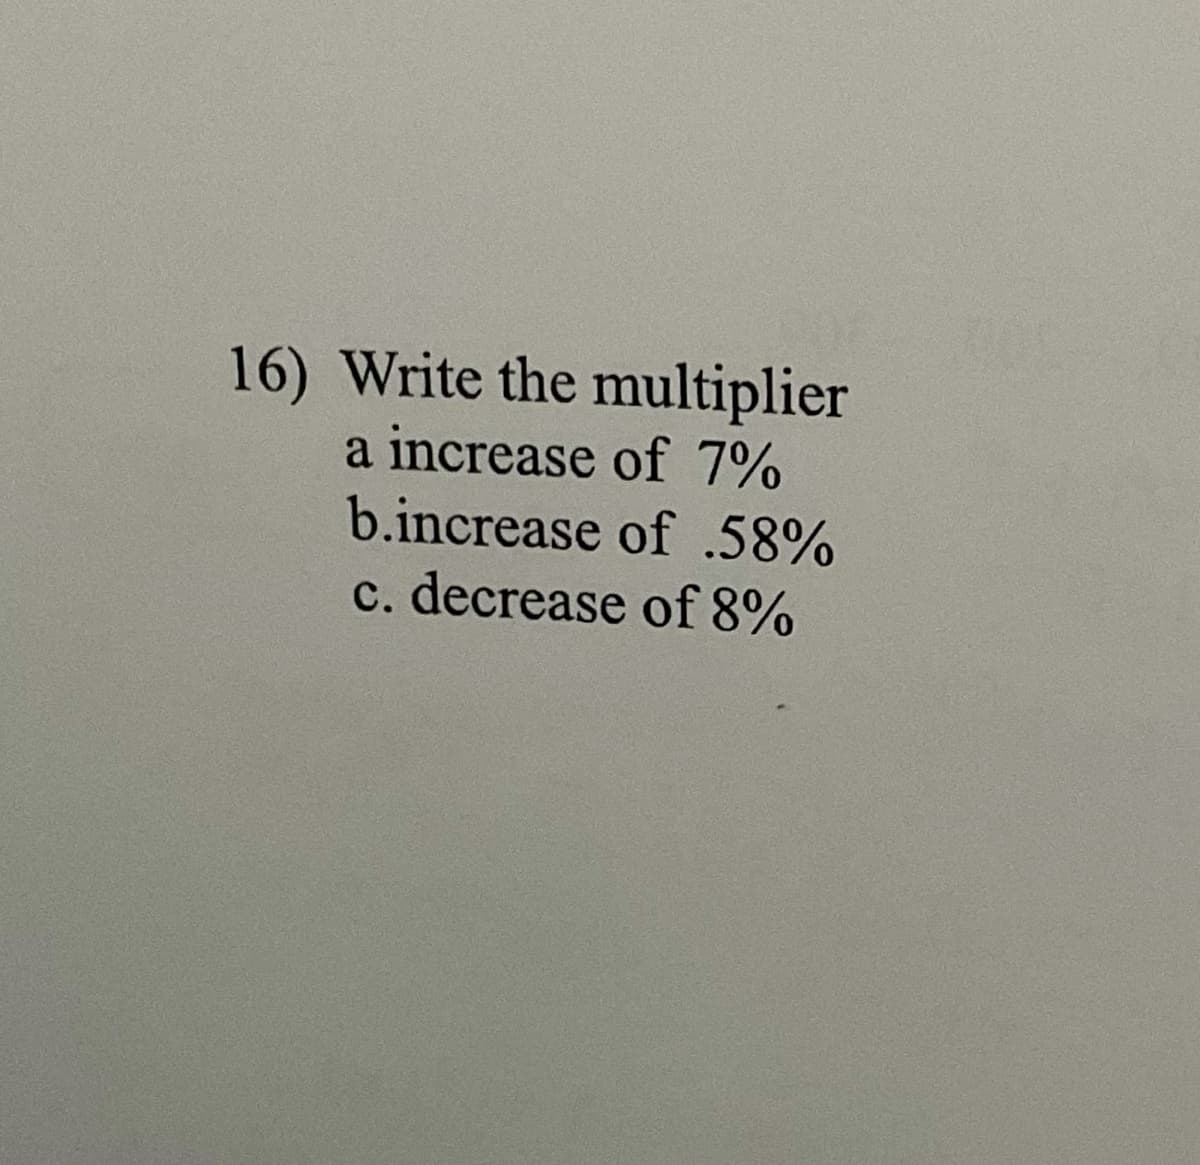 16) Write the multiplier
a increase of 7%
b.increase of .58%
c. decrease of 8%
